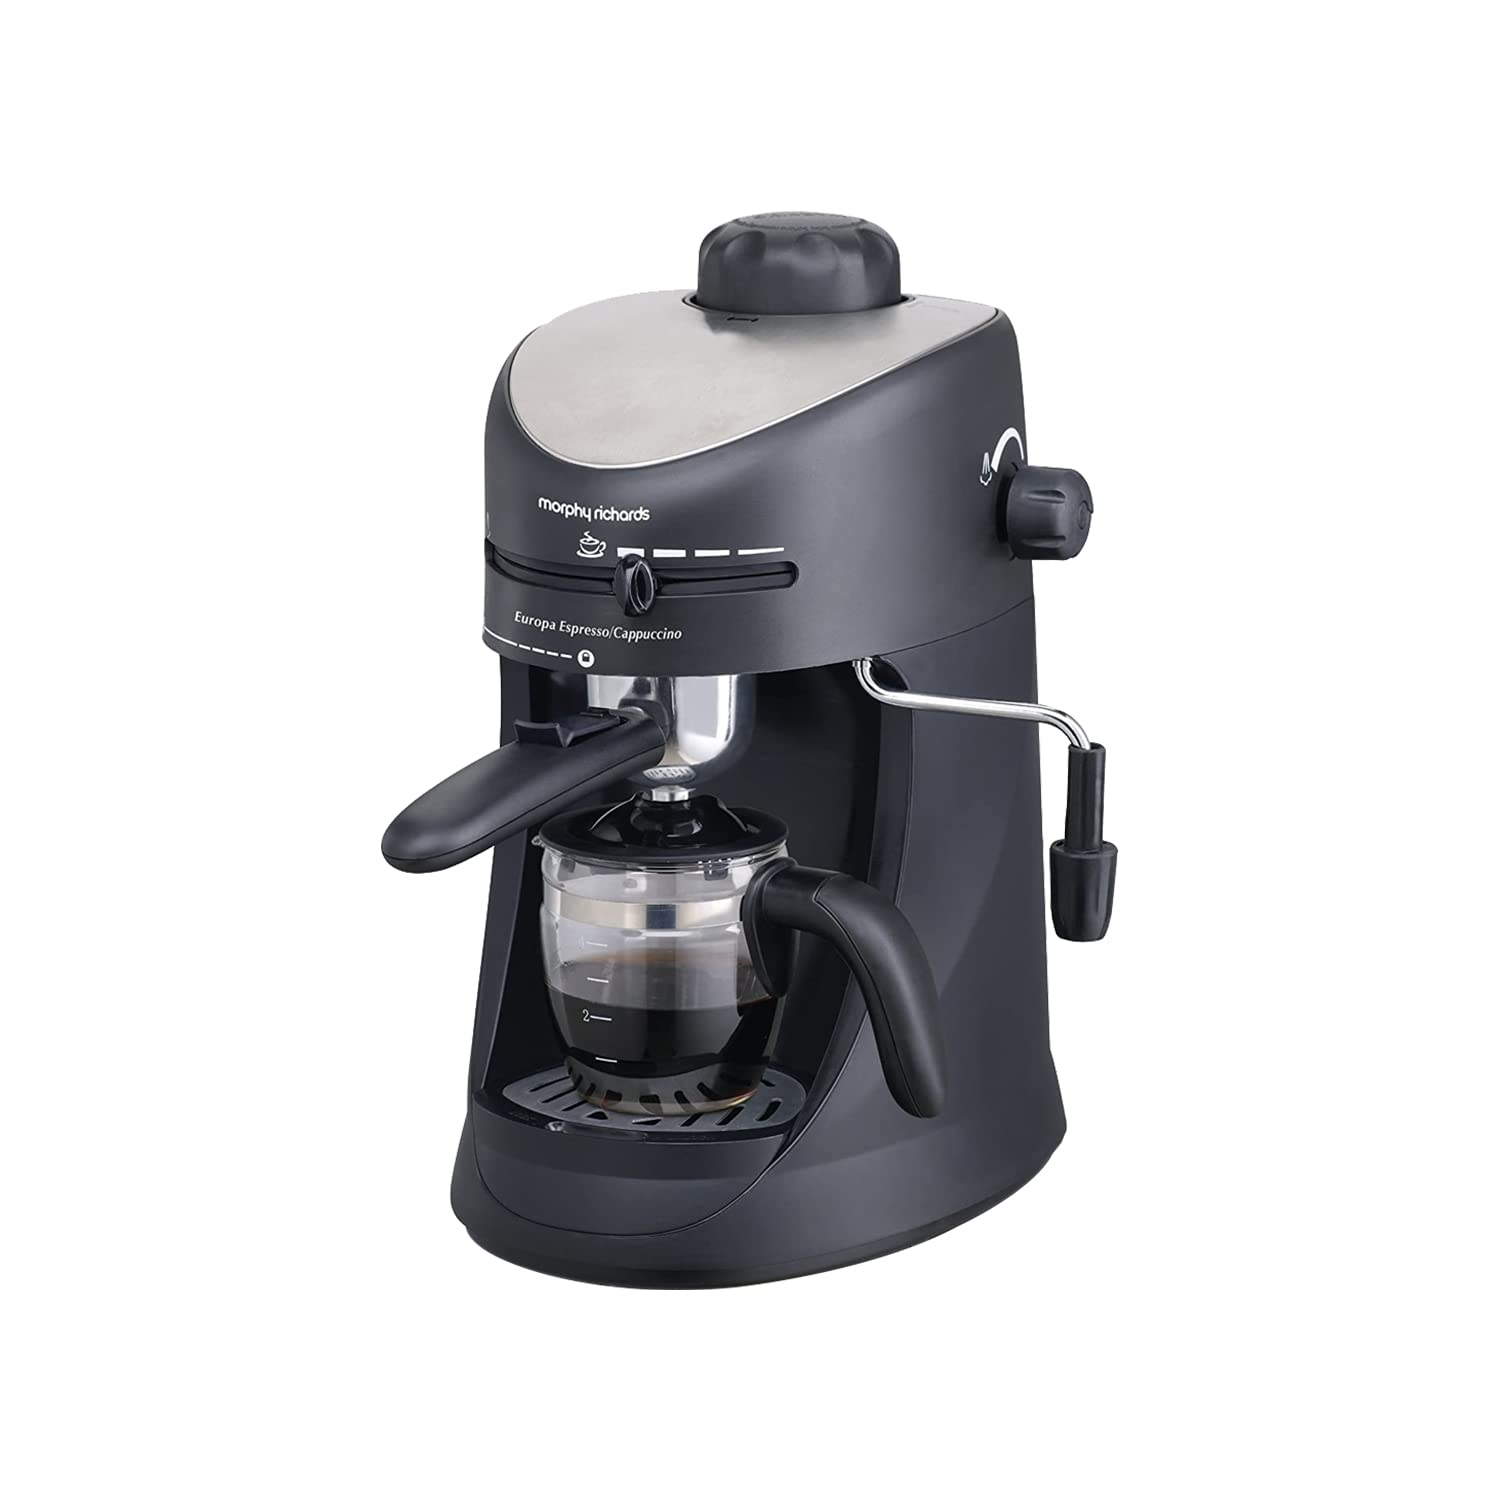 Philips Coffee Machine HD7432/20 Online at Best Price, Coffee Makers